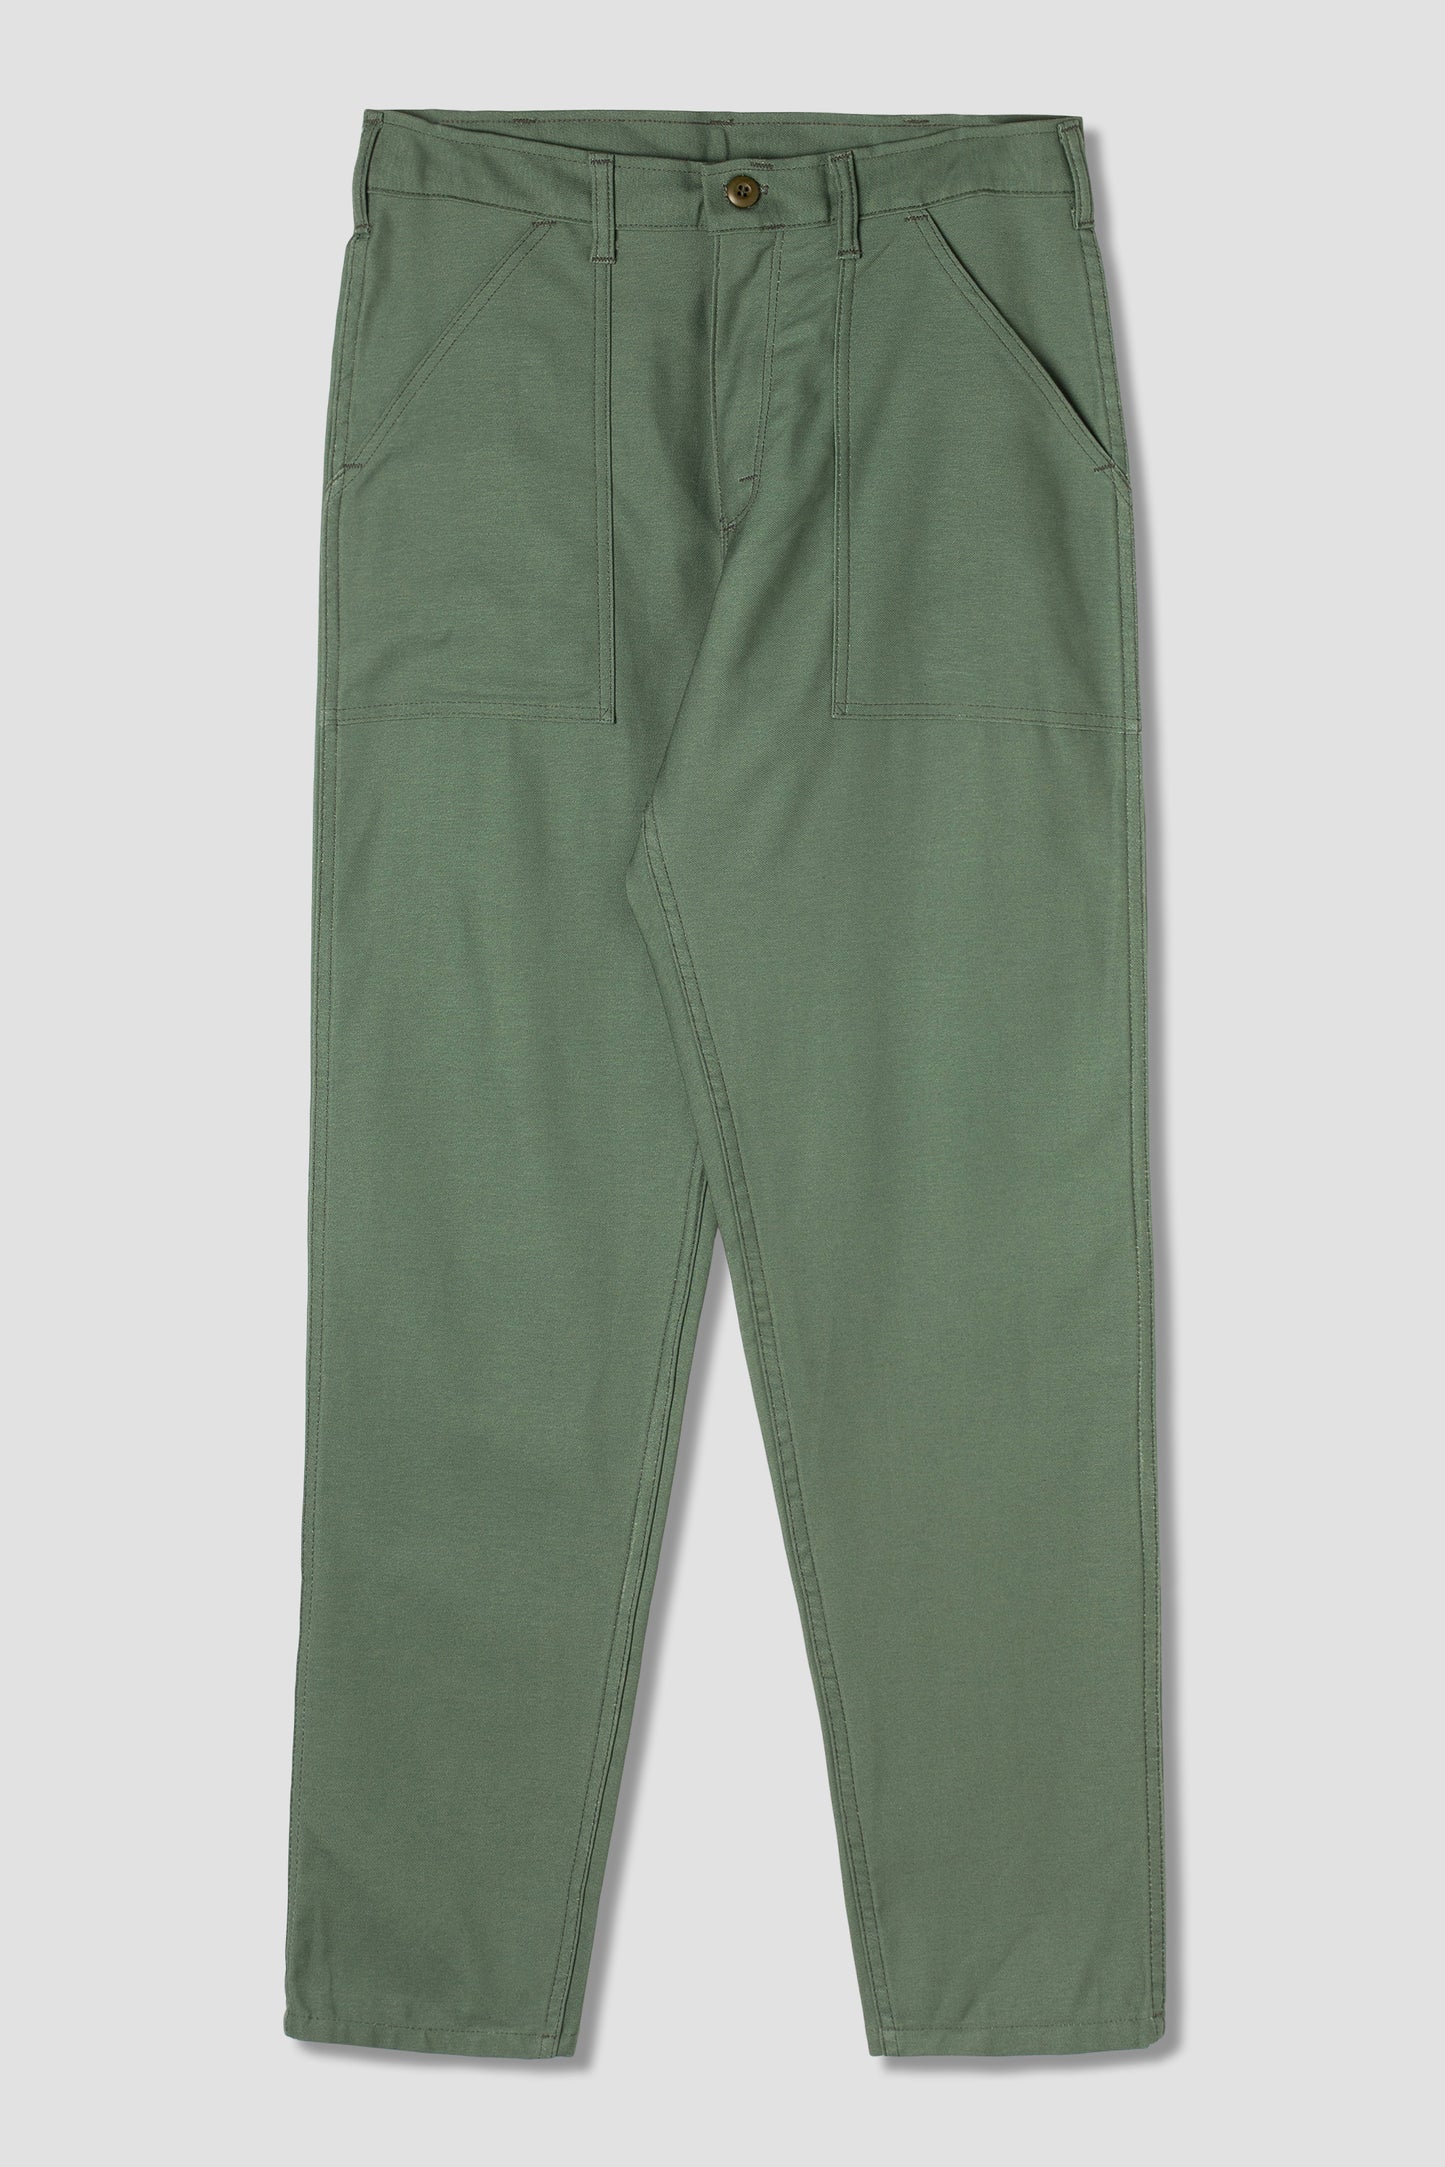 Taper Fatigue (Olive Sateen 8.5oz) - Stan Ray